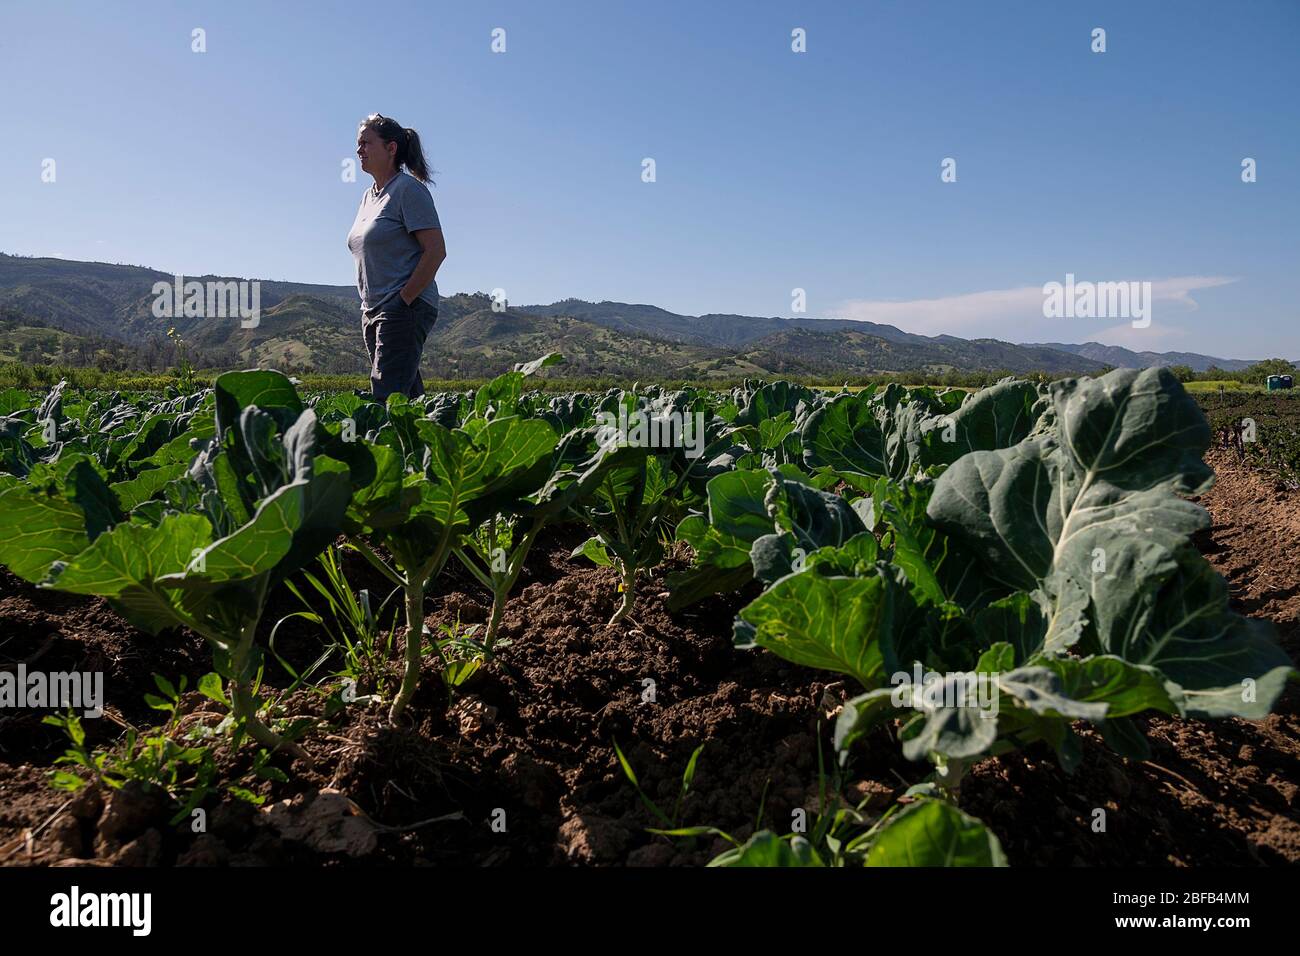 Brooks, CA, USA. 16th Apr, 2020. Organic farmer Trina Campbell of Riverdog Farm in Guida stands is one of her collard greens fields during the coronavirus pandemic on Thursday, April 16, 2020. Riverdog Farm works 450 acres of land in the Capay Valley and her company has had four-fold increase in sale of the csa (community supported agriculture) boxes of fresh produce as her restaurants sales have diminished. Credit: Paul Kitagaki Jr./ZUMA Wire/Alamy Live News Stock Photo